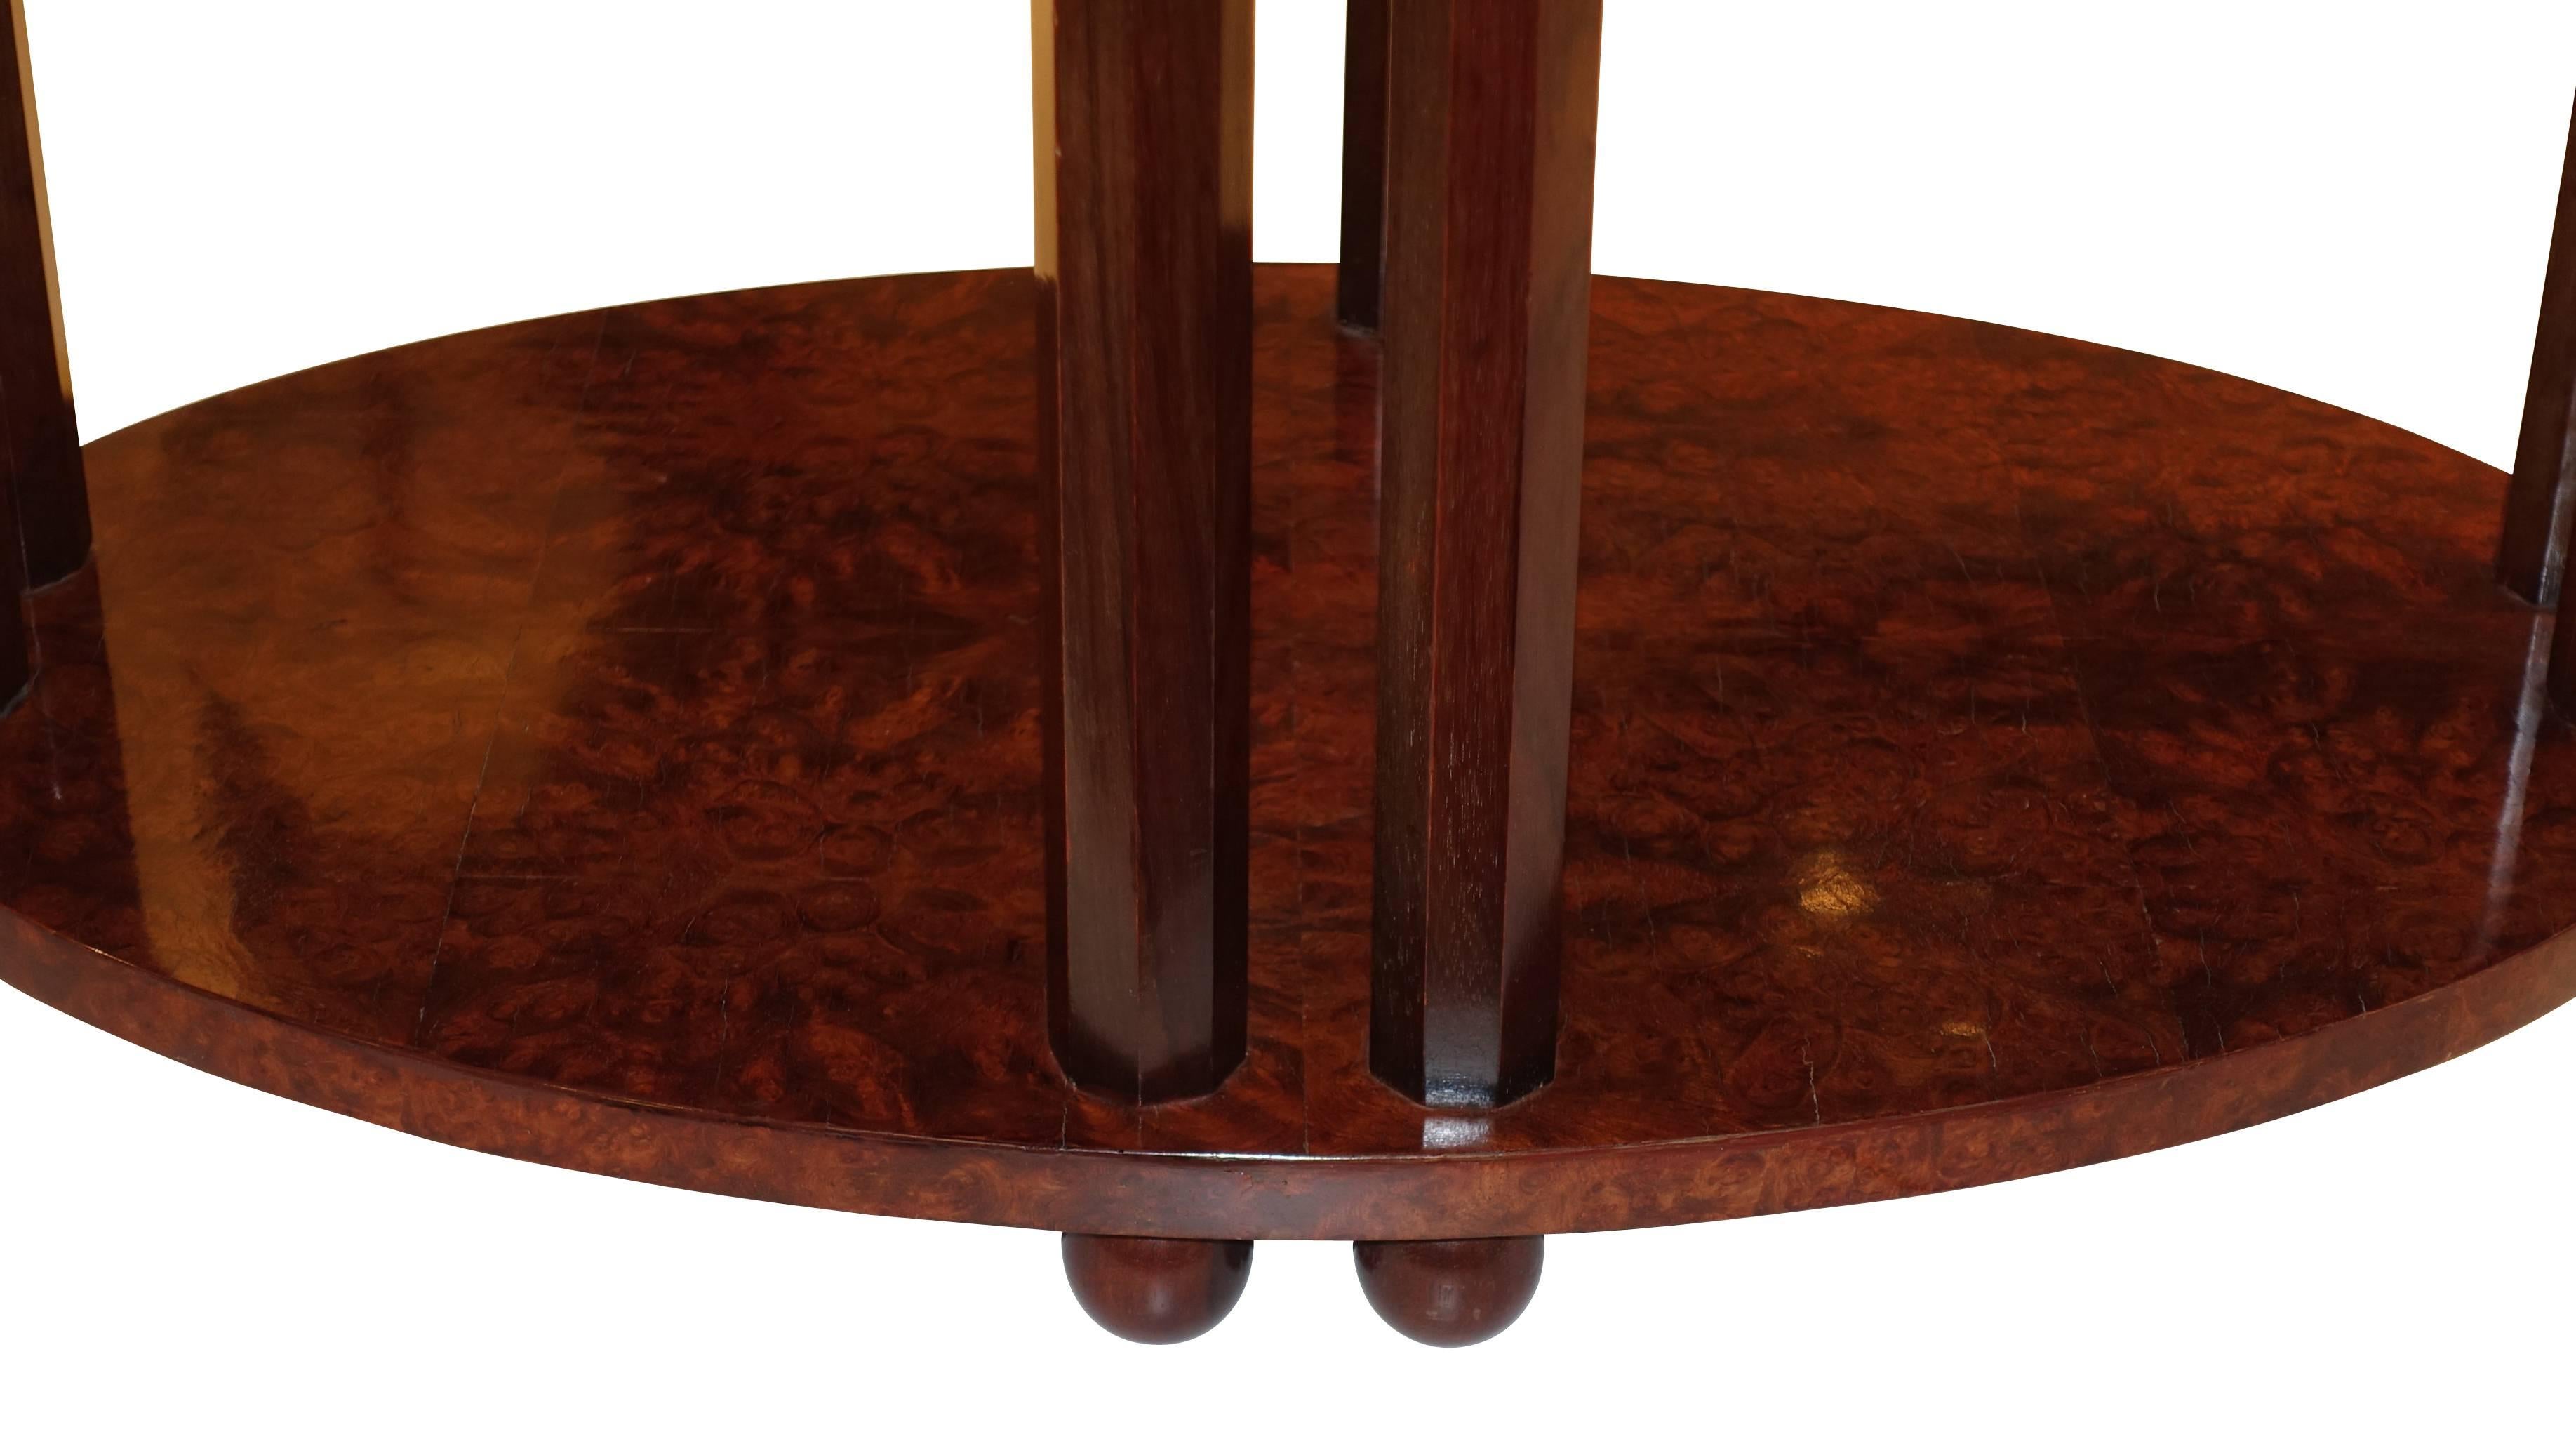 1940s French newly refinished burl mahogany oval shape two-tier side table.
Octagonally shaped legs with ball feet support.
Excellent condition.
